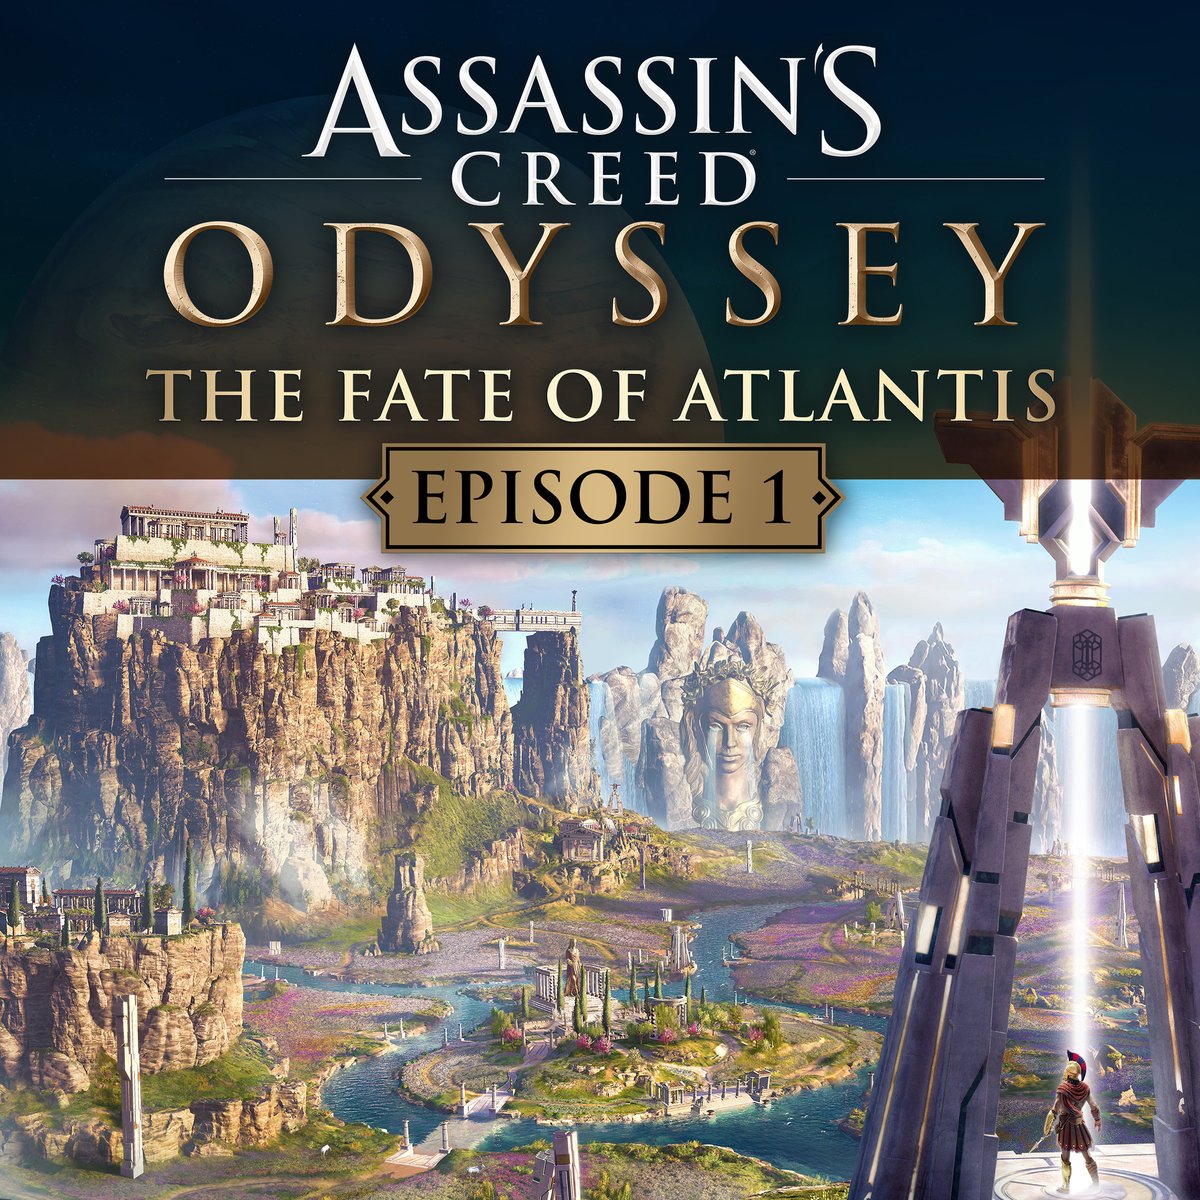 The Fate of Atlantis: Fields of Elysium | Assassin's Creed Wiki | Fandom